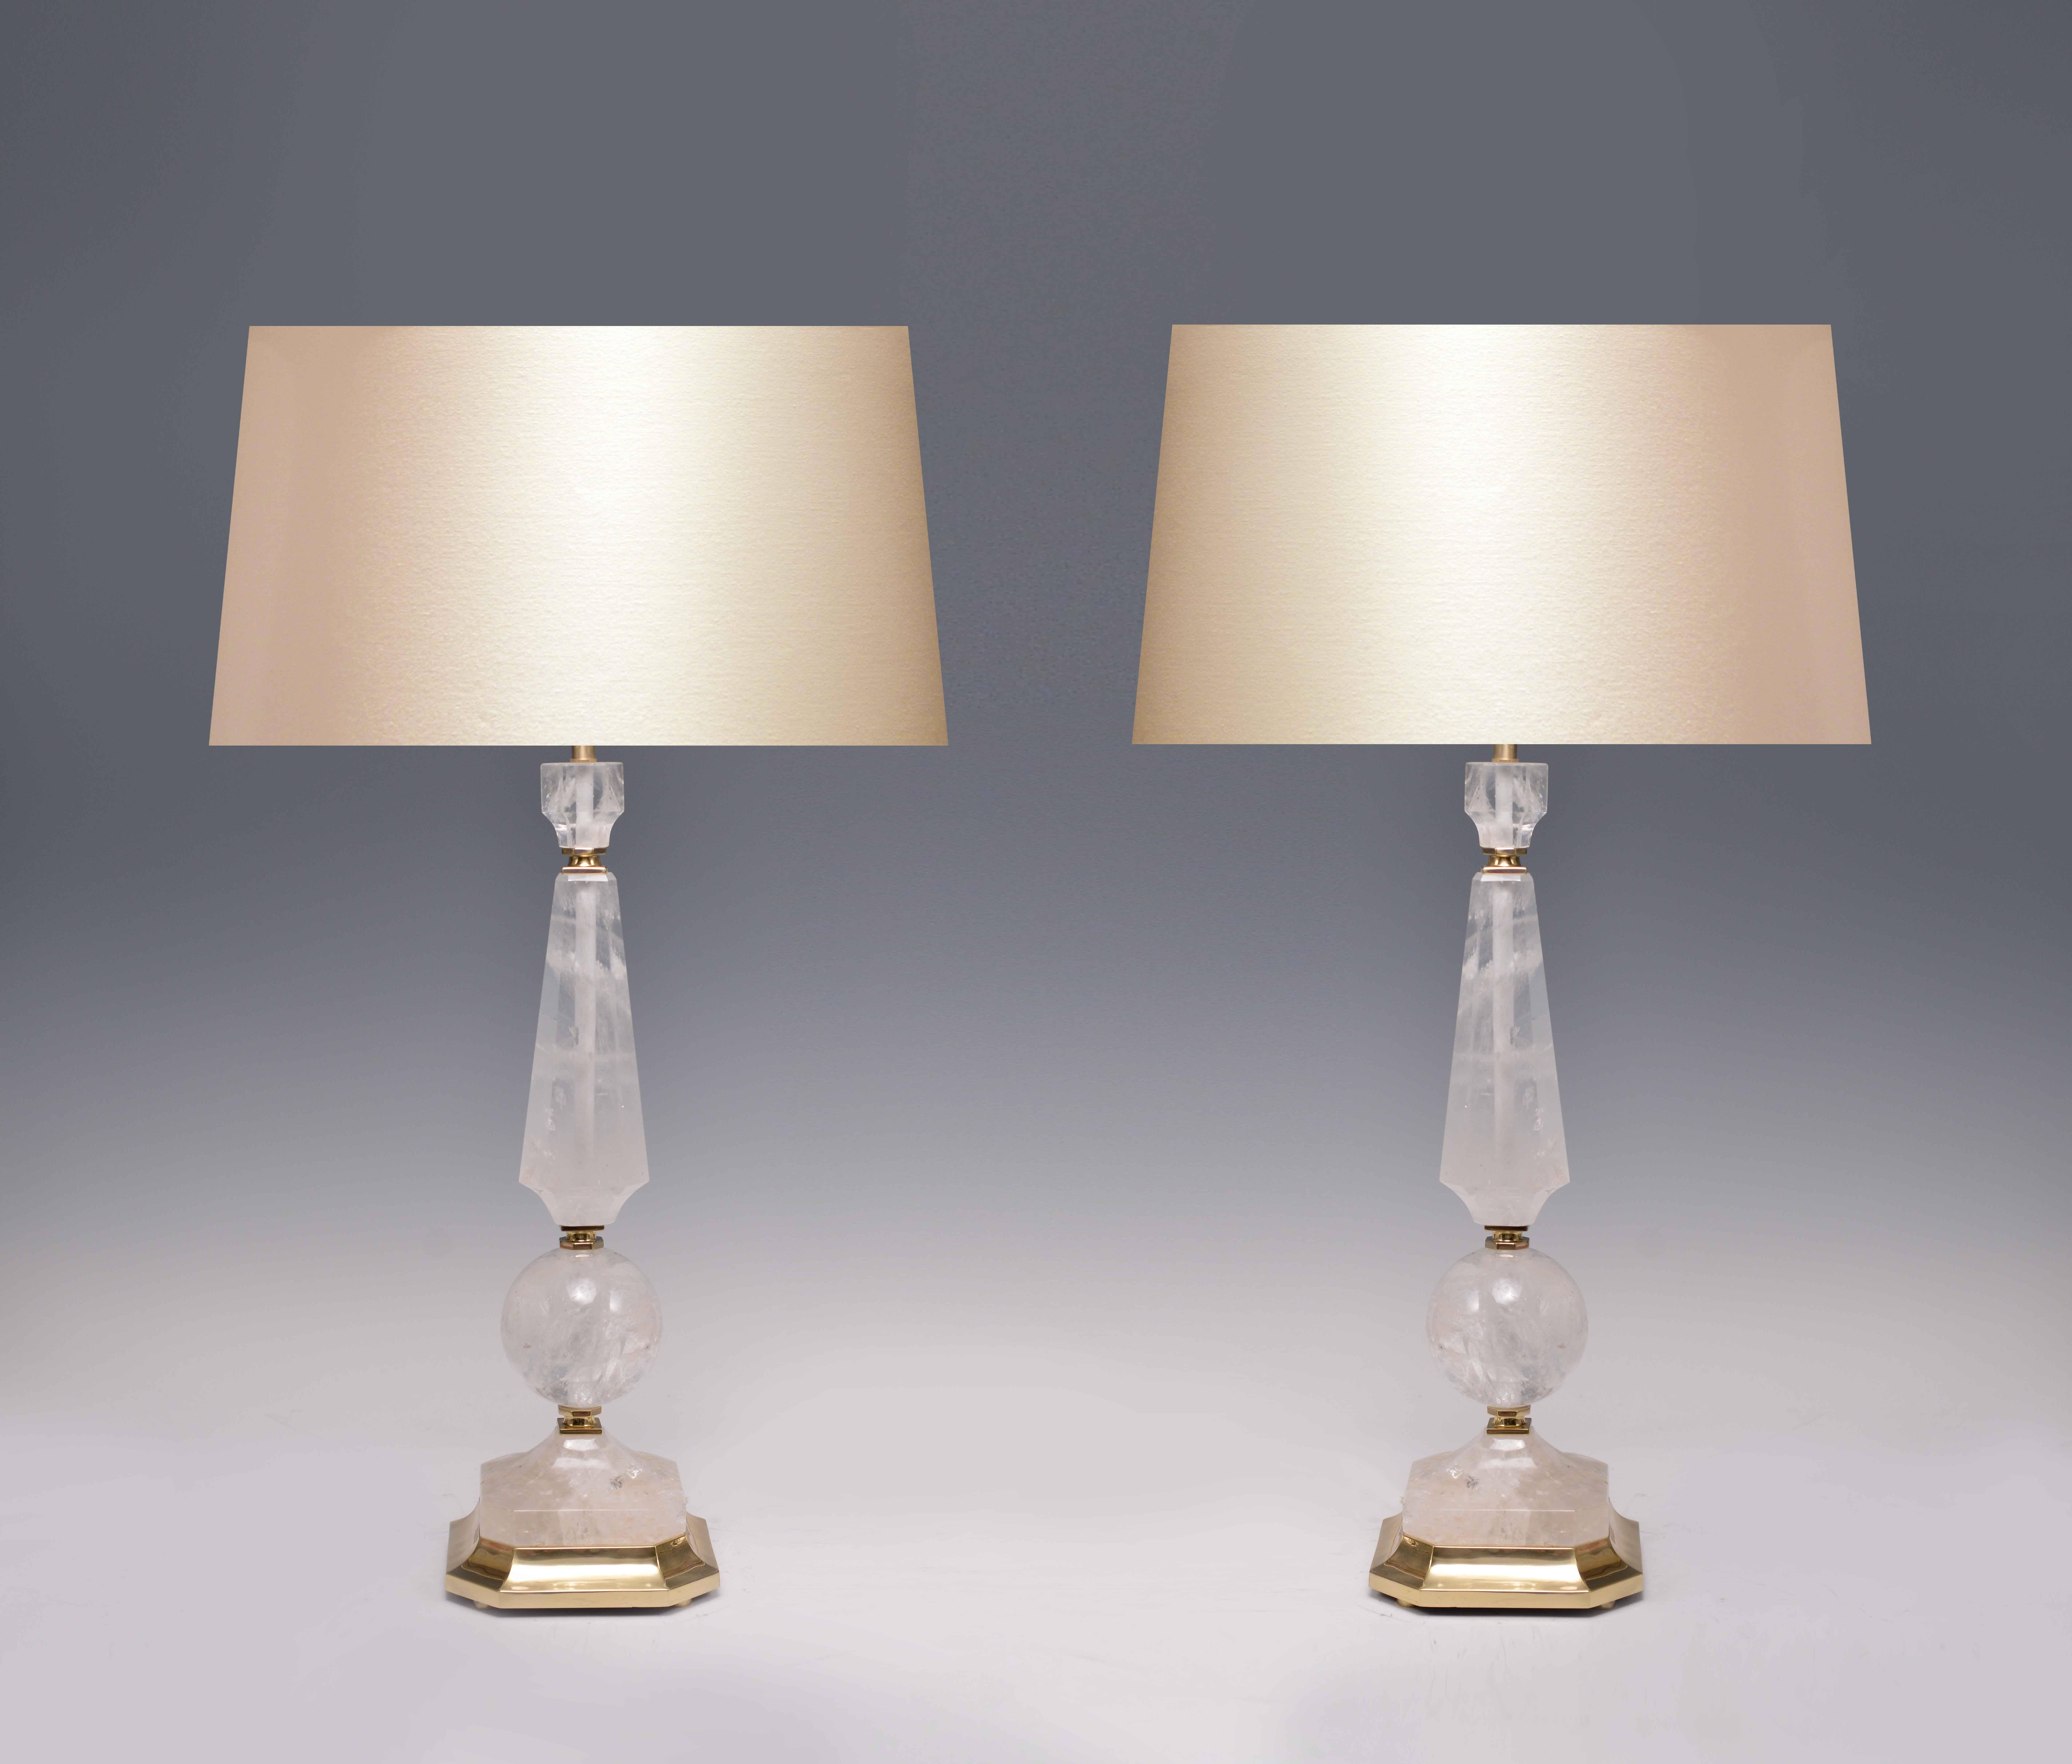 Pair of fine carved prism and globe rock crystal lamps with polish brass bases, created by Phoenix Gallery, NYC.
Available in nickel plating and antique brass finished. 
To the rock crystal: 22.25